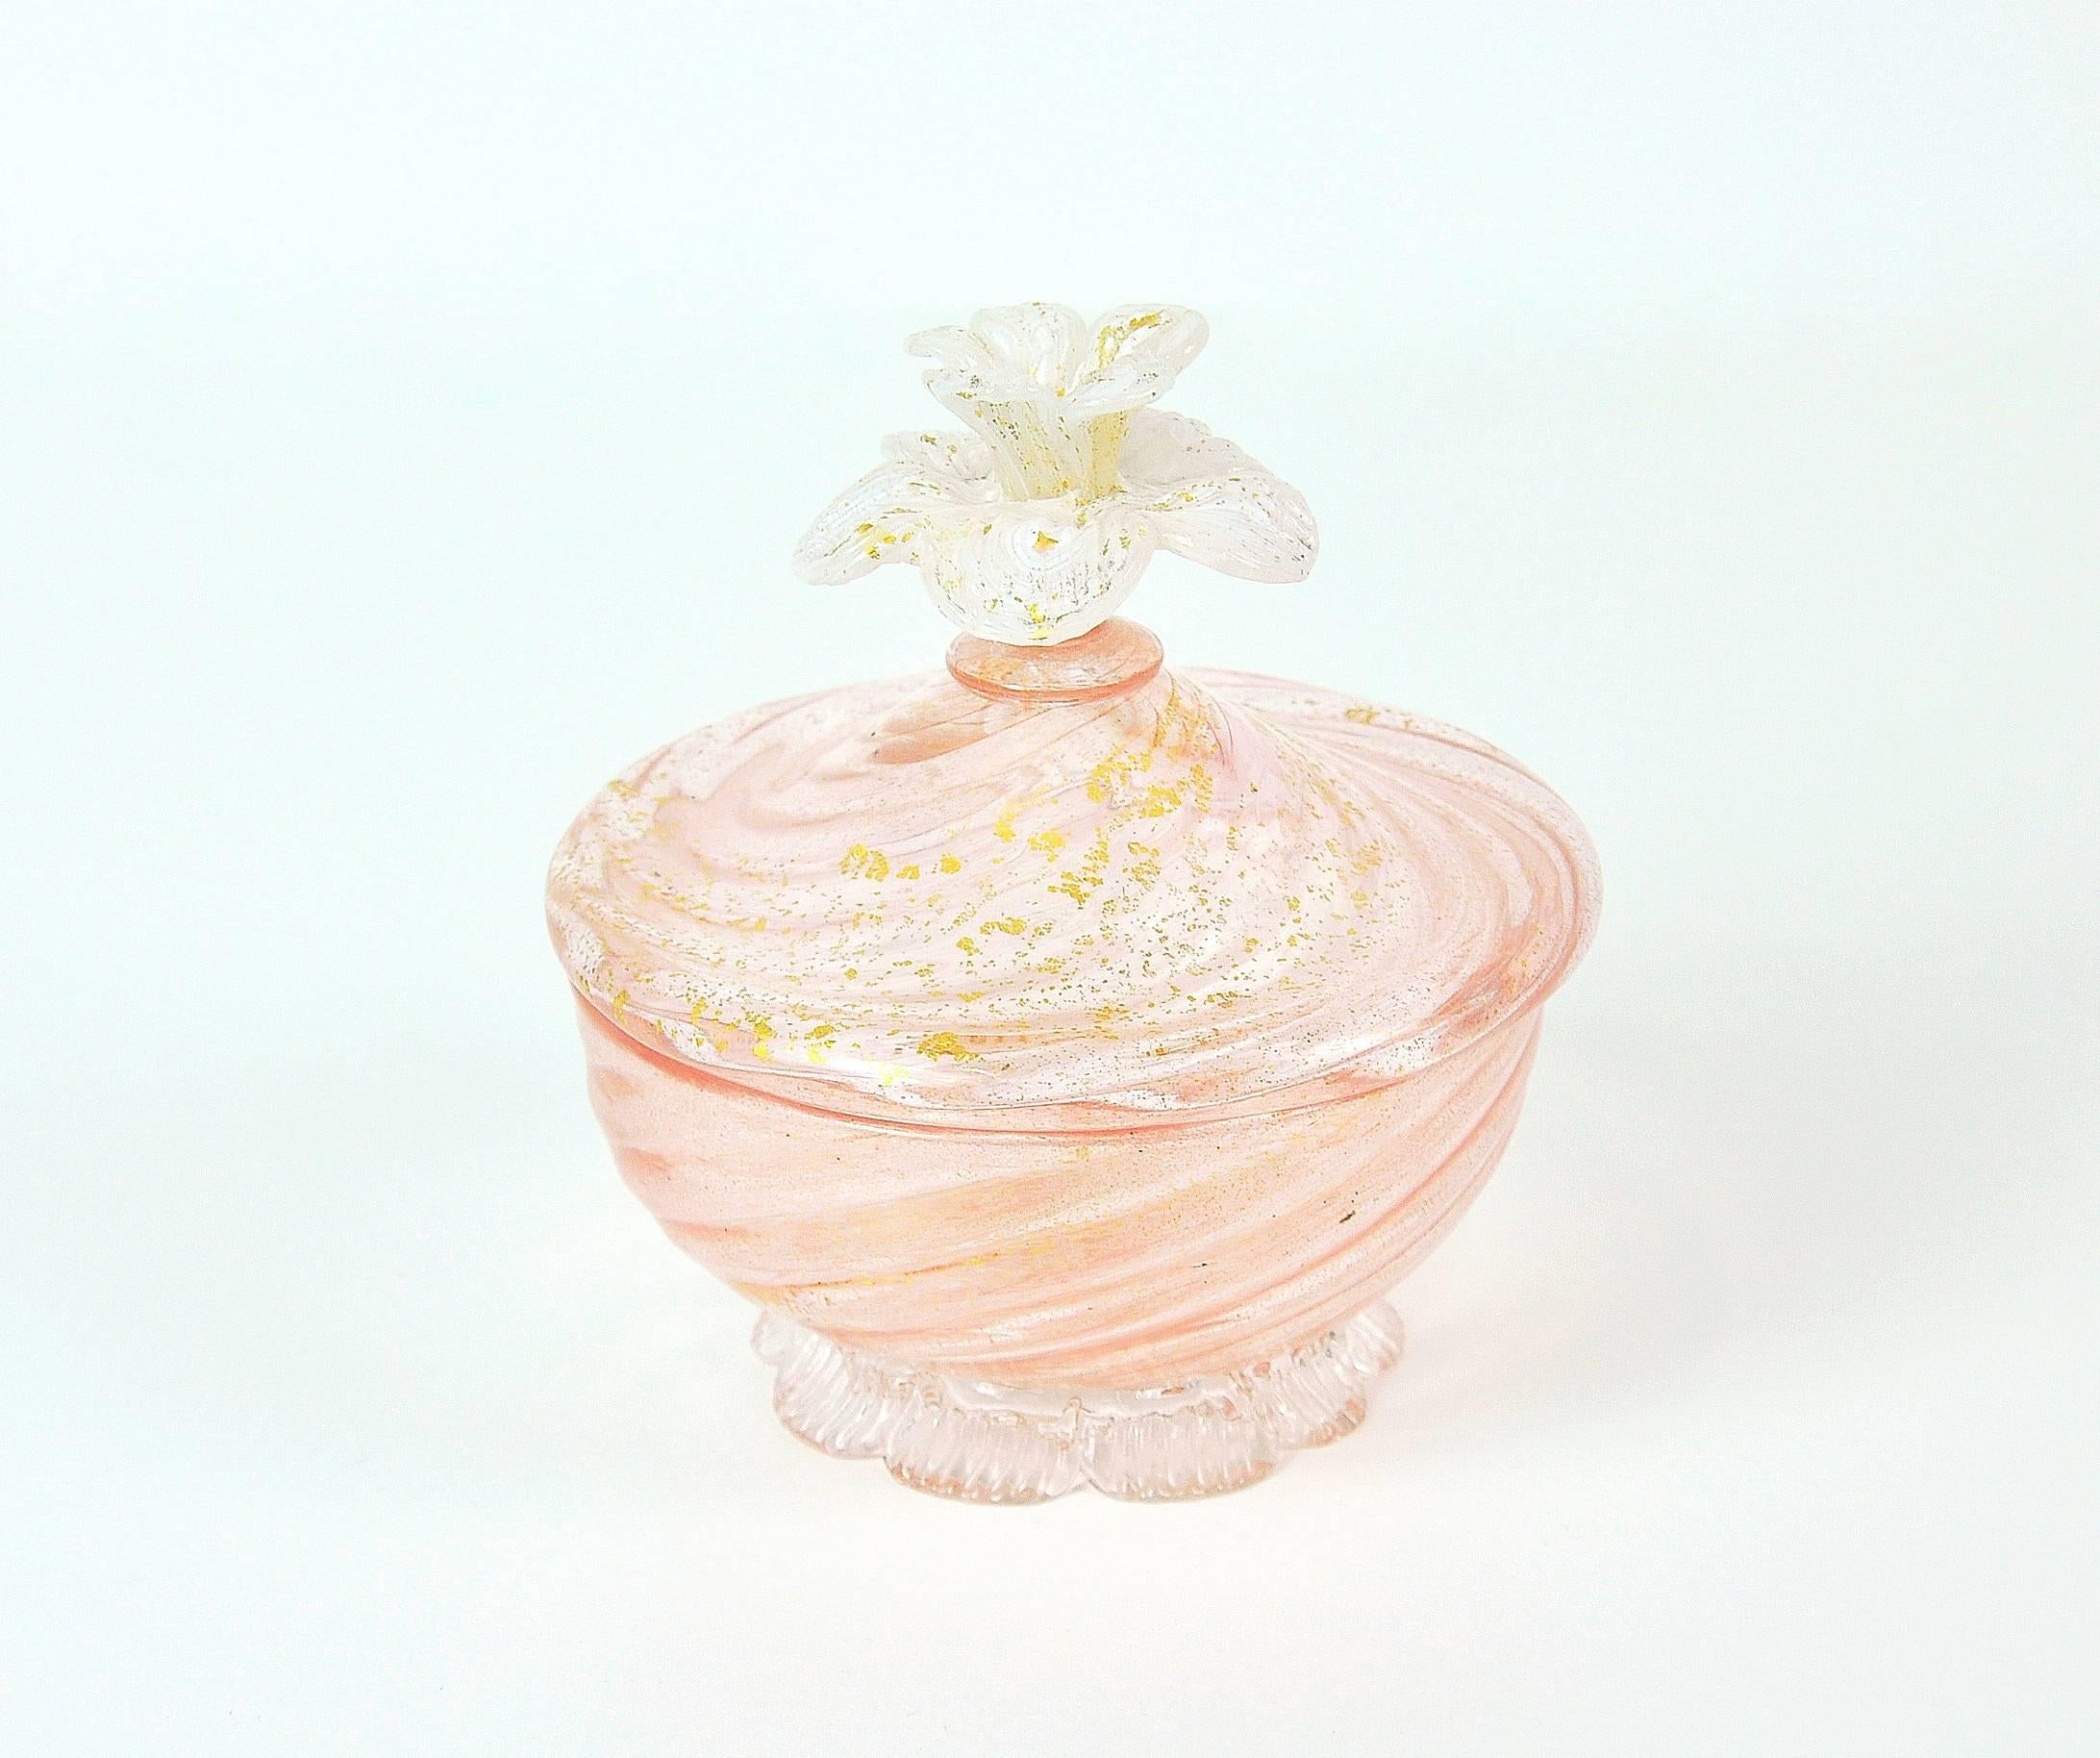 This vintage Venetian handblown art glass covered footed bowl features gold leaf inclusions, a figural finial skillfully shaped like a flower and a petal or leaf shaped base. The jar's soft, pastel pink hue makes for an elegant contrast to the gold